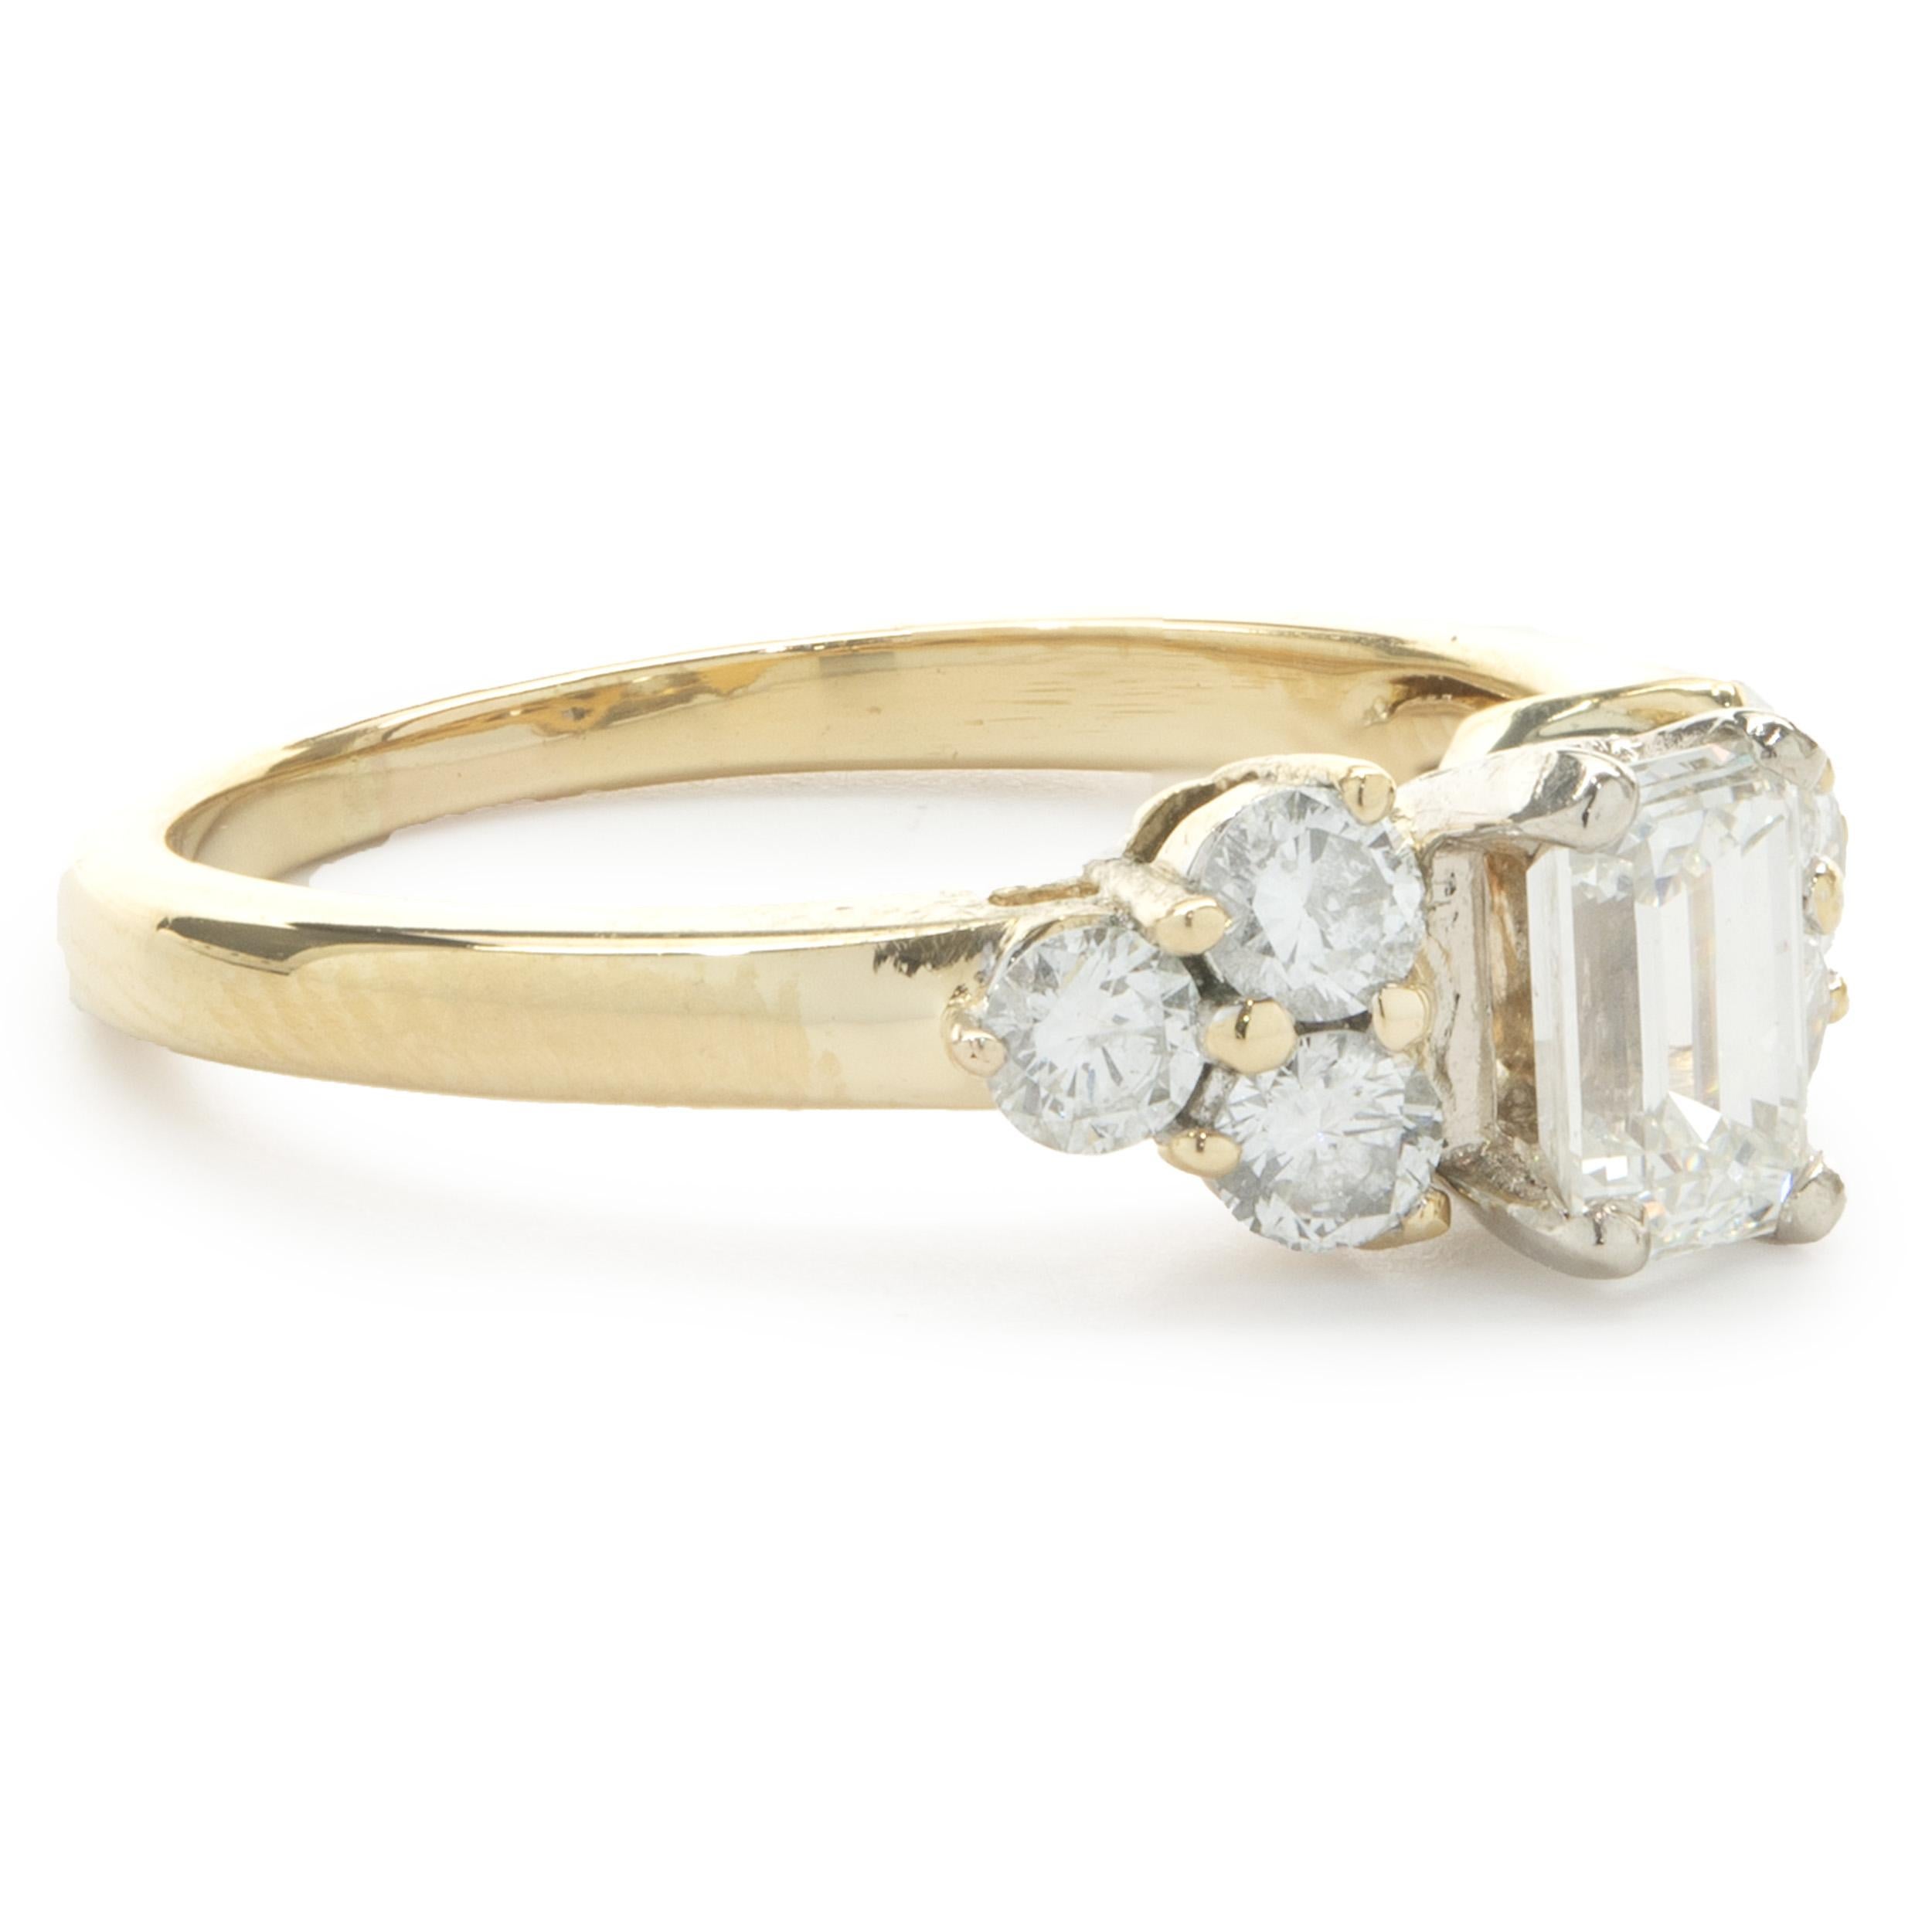 Designer: custom
Material: 14K yellow gold
Diamond: 1 emerald cut = 0.70ct
Color: I 
Clarity: VS2
Diamond: 6 round brilliant = 0.48cttw 
Color: G
Clarity: SI1
Ring Size: 7.75 (please allow two additional shipping days for sizing